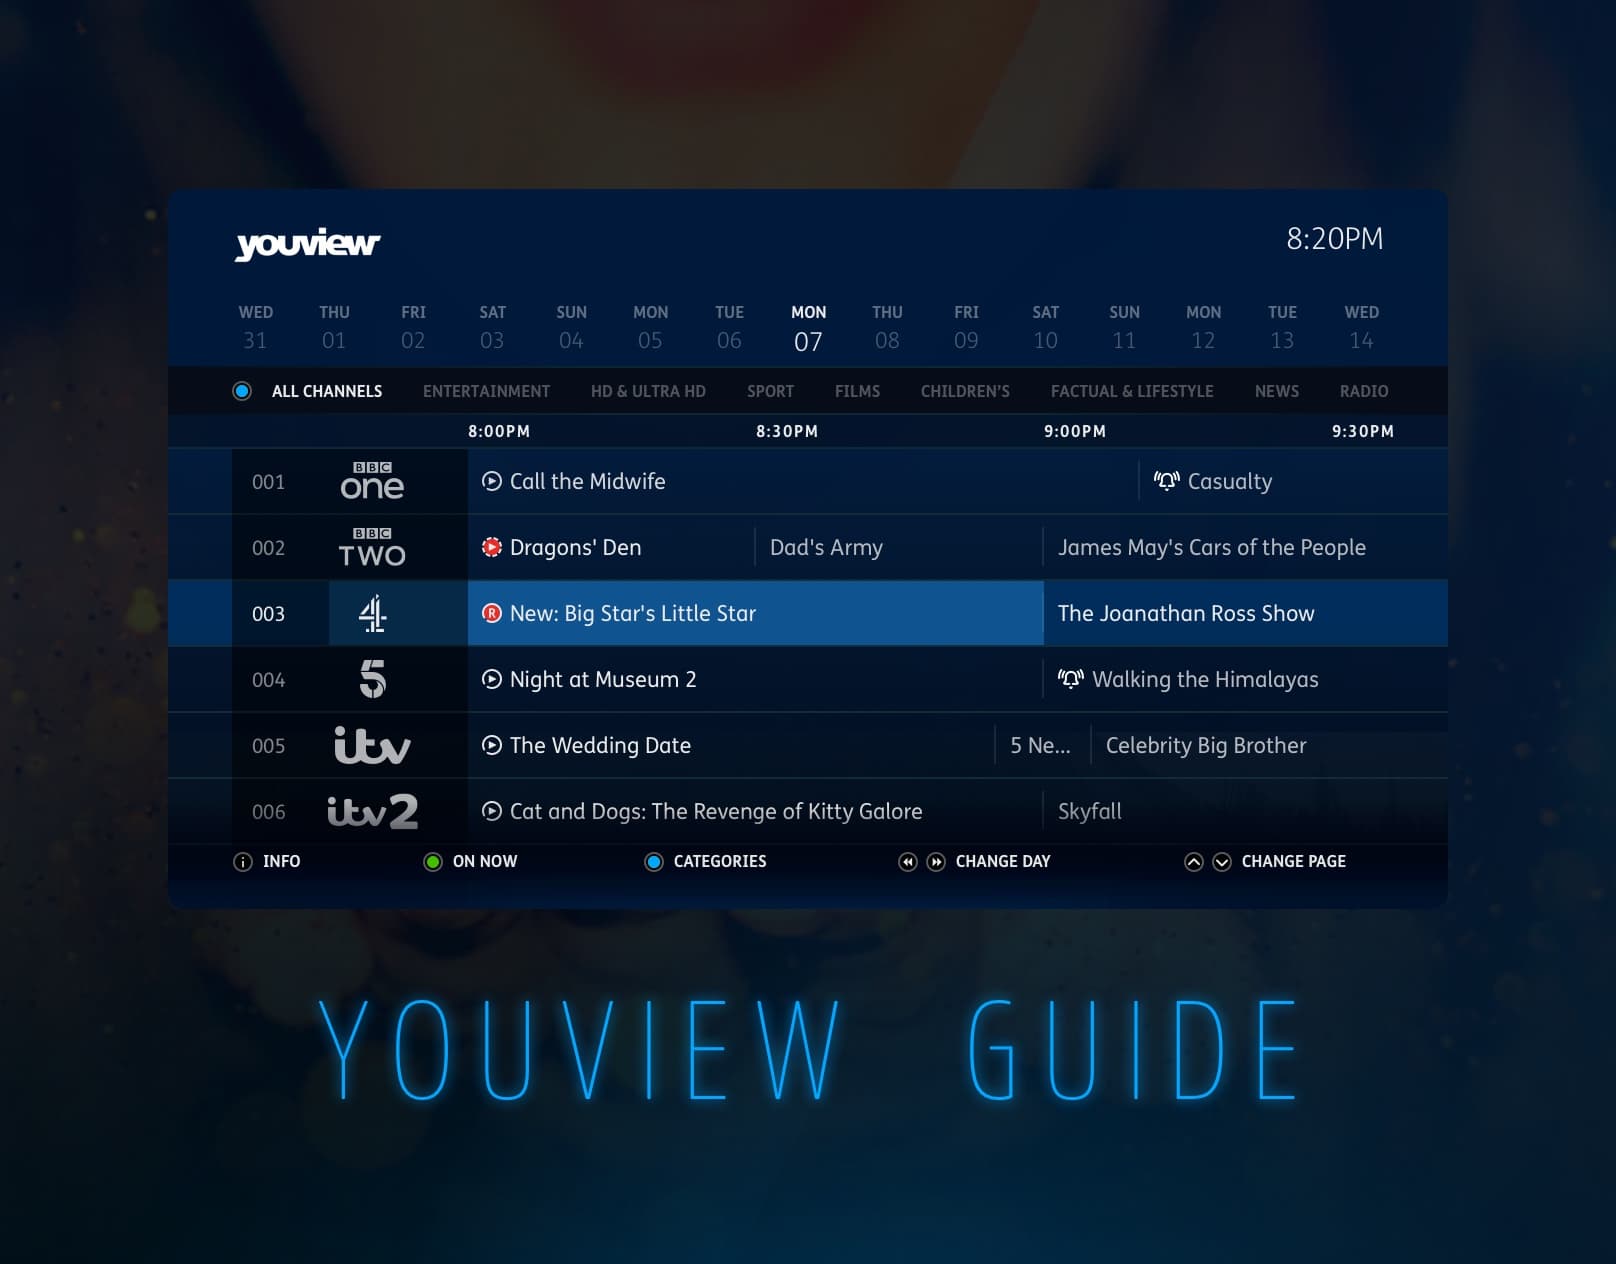 YouView's TV Guide showing a range of programmes from UK broadcasters.